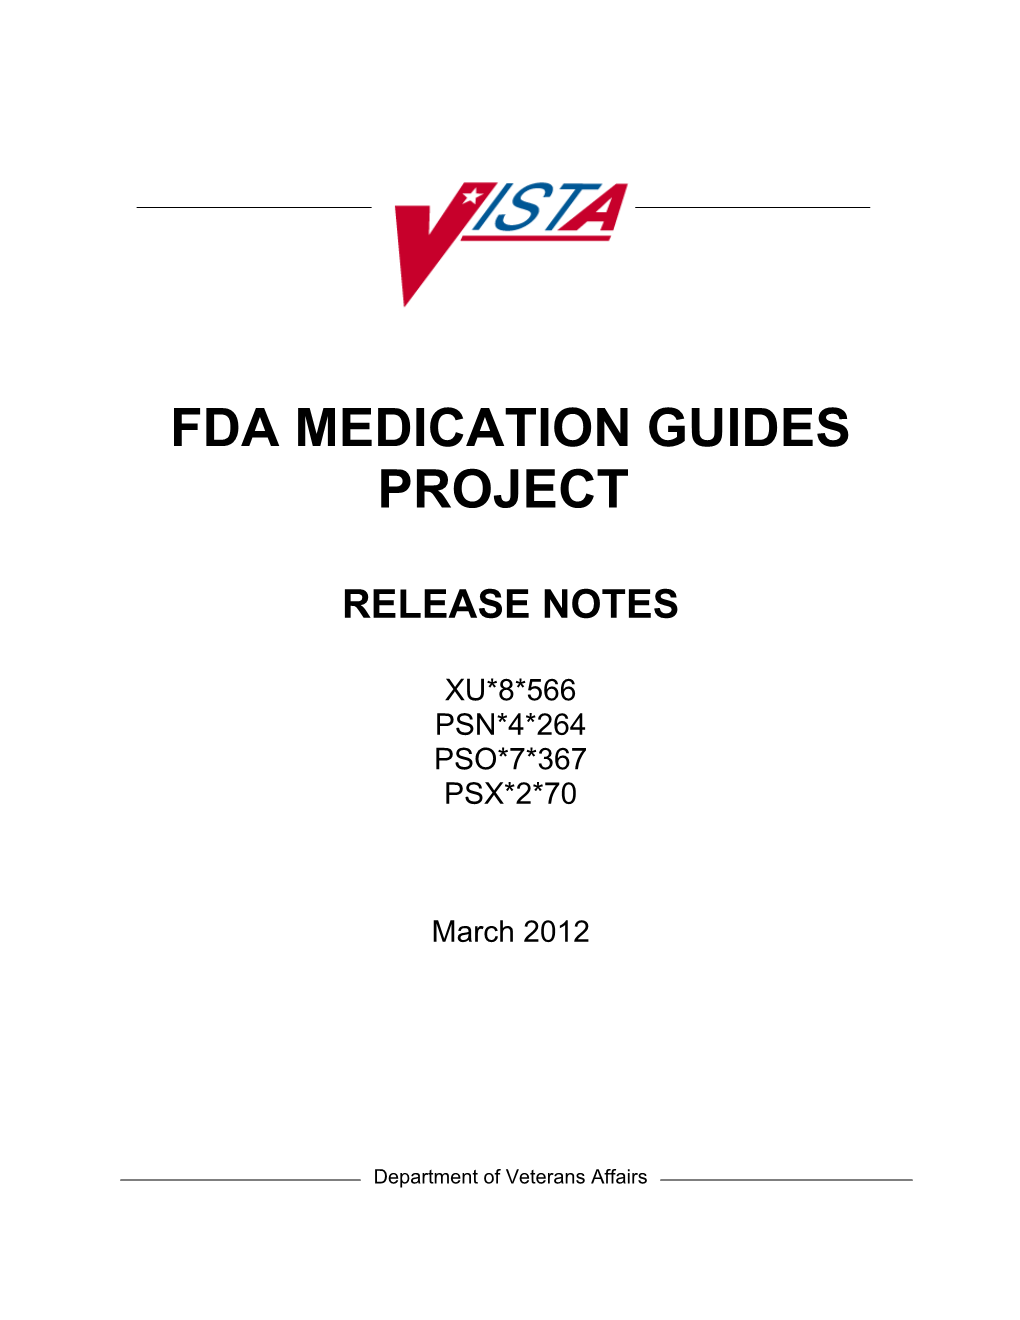 FDA Medication Guides Release Notes